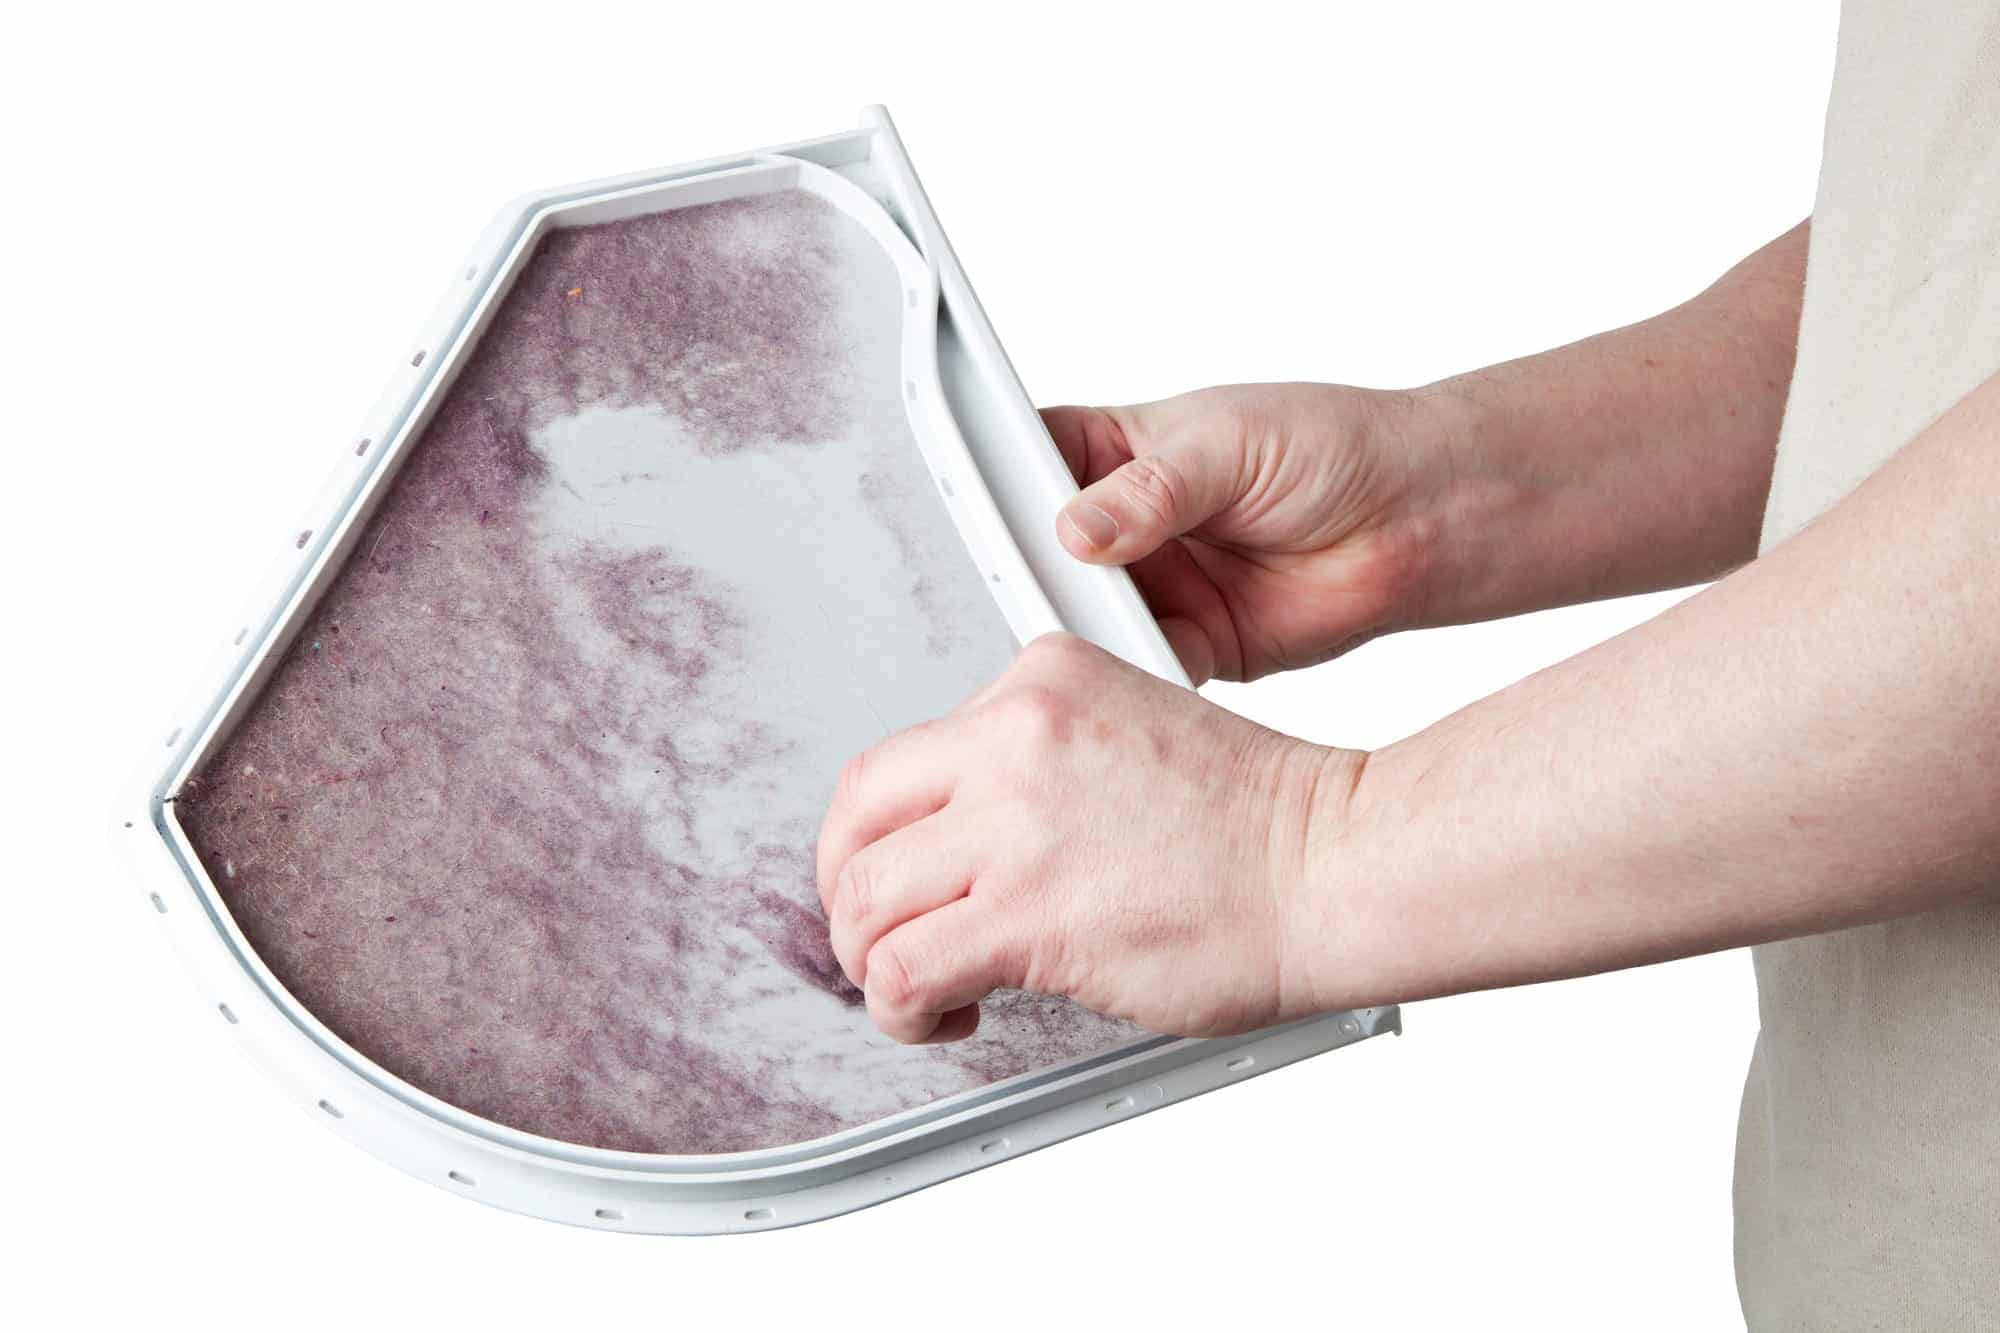 https://www.laundrysolutionscompany.com/wp-content/uploads/2019/04/cleaning-the-lint-from-a-dryers-lint-trap.jpg